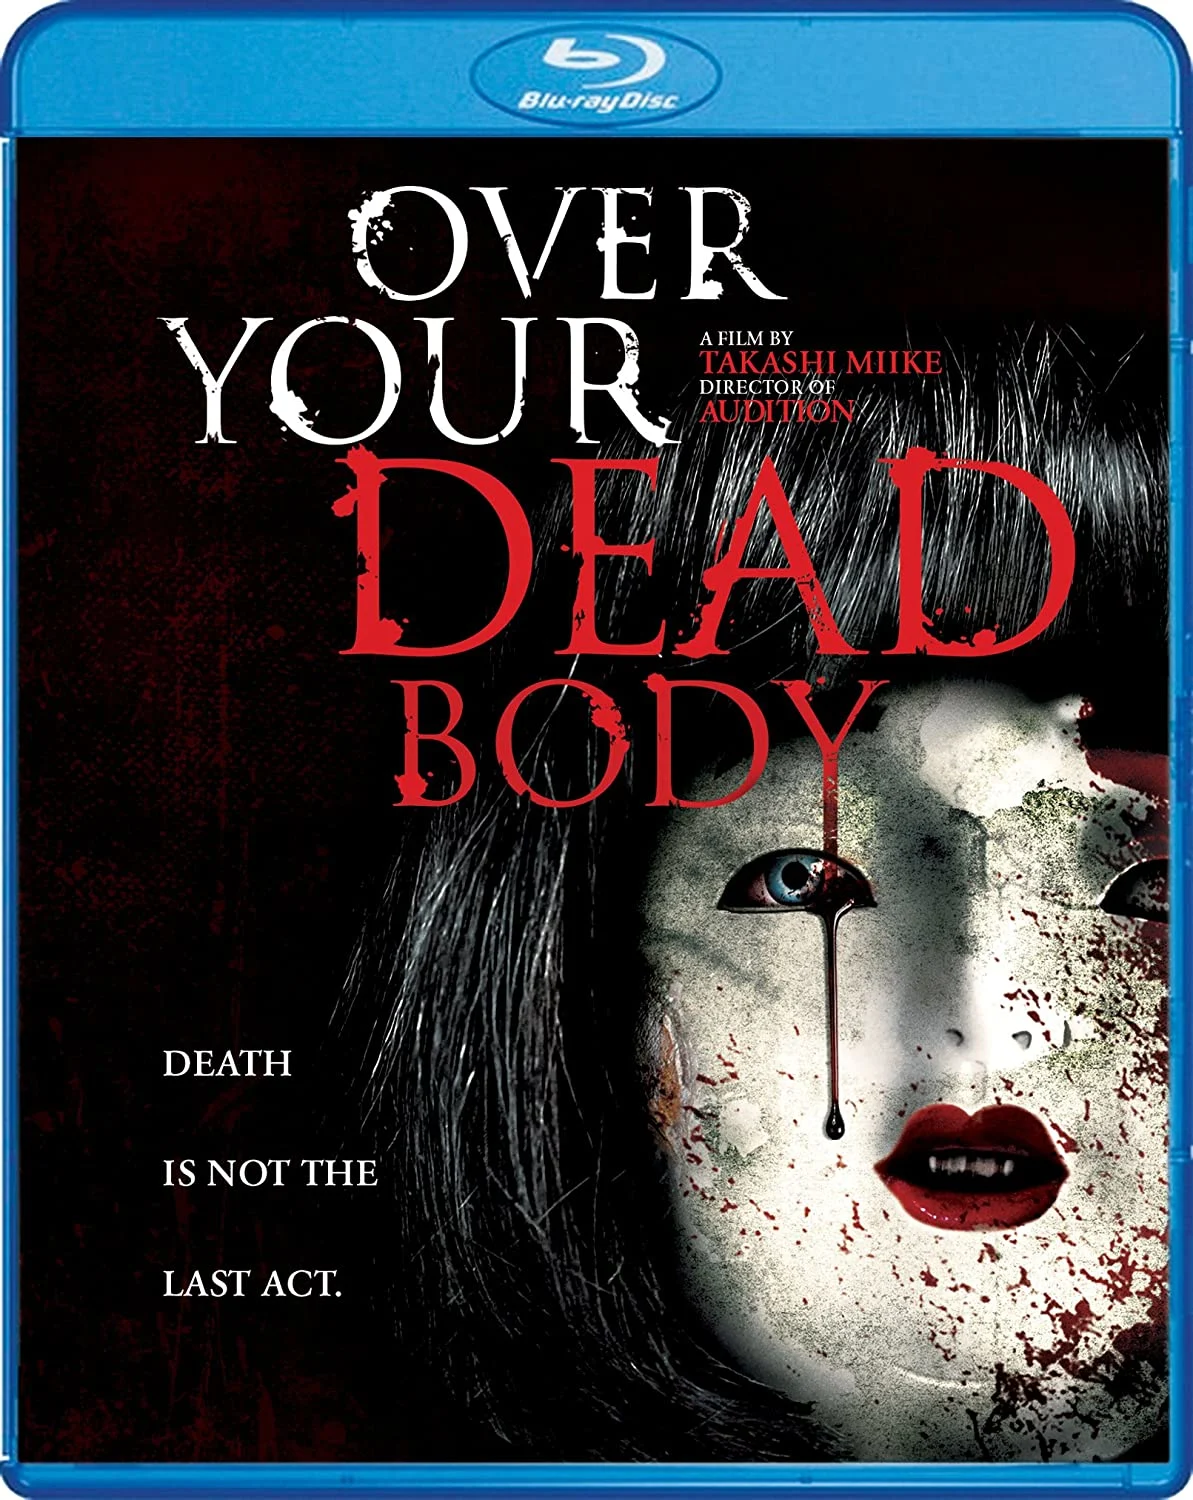 Over Your Dead Body (Blu-ray) on MovieShack